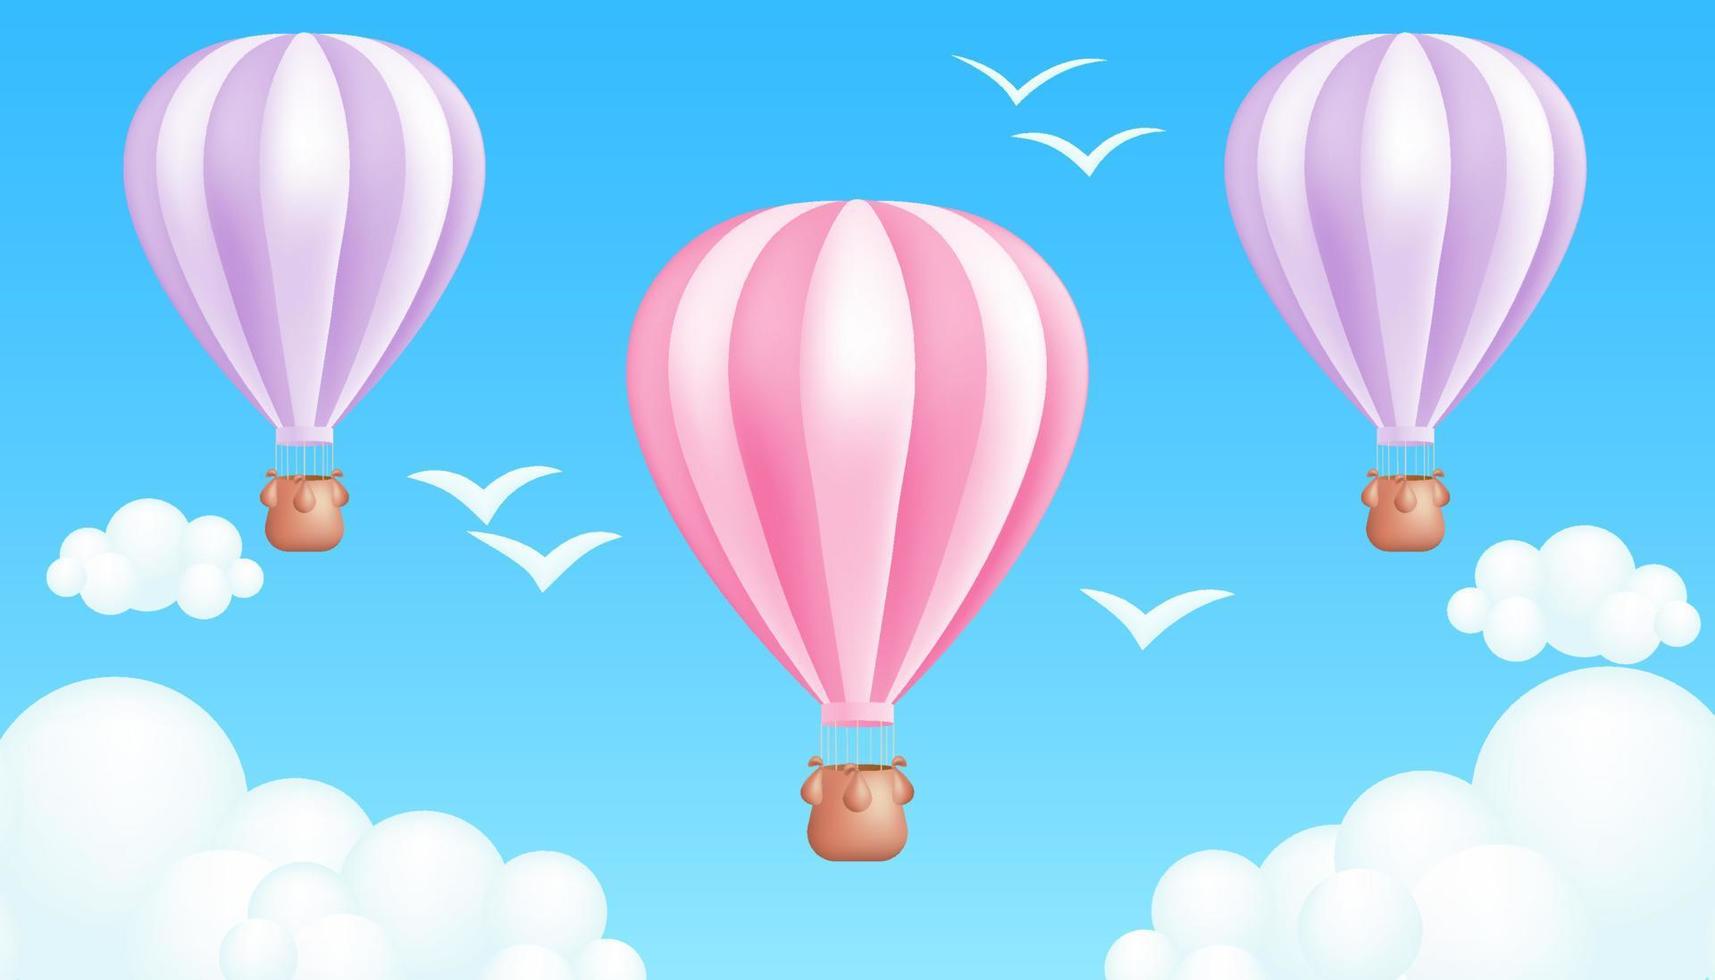 Realistic 3D cartoon vector illustration of a striped hot air balloon. Pastel colors. Perfect for outdoor activities, tourism, and summer fun, festival banners and children's illustrations